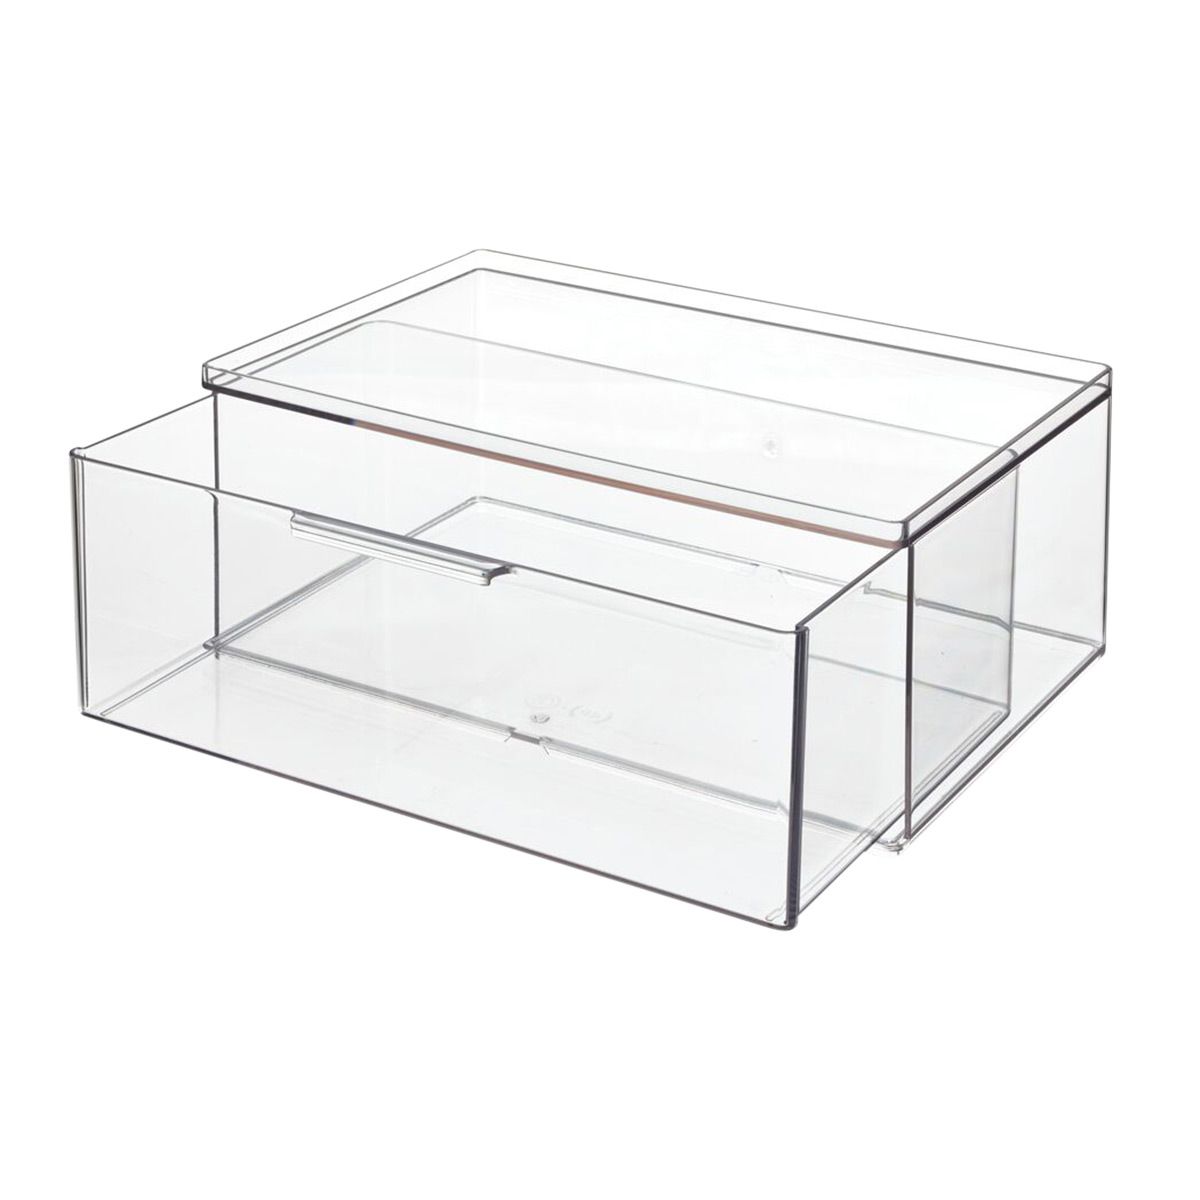 T.H.E. Large Deep Drawer | The Container Store